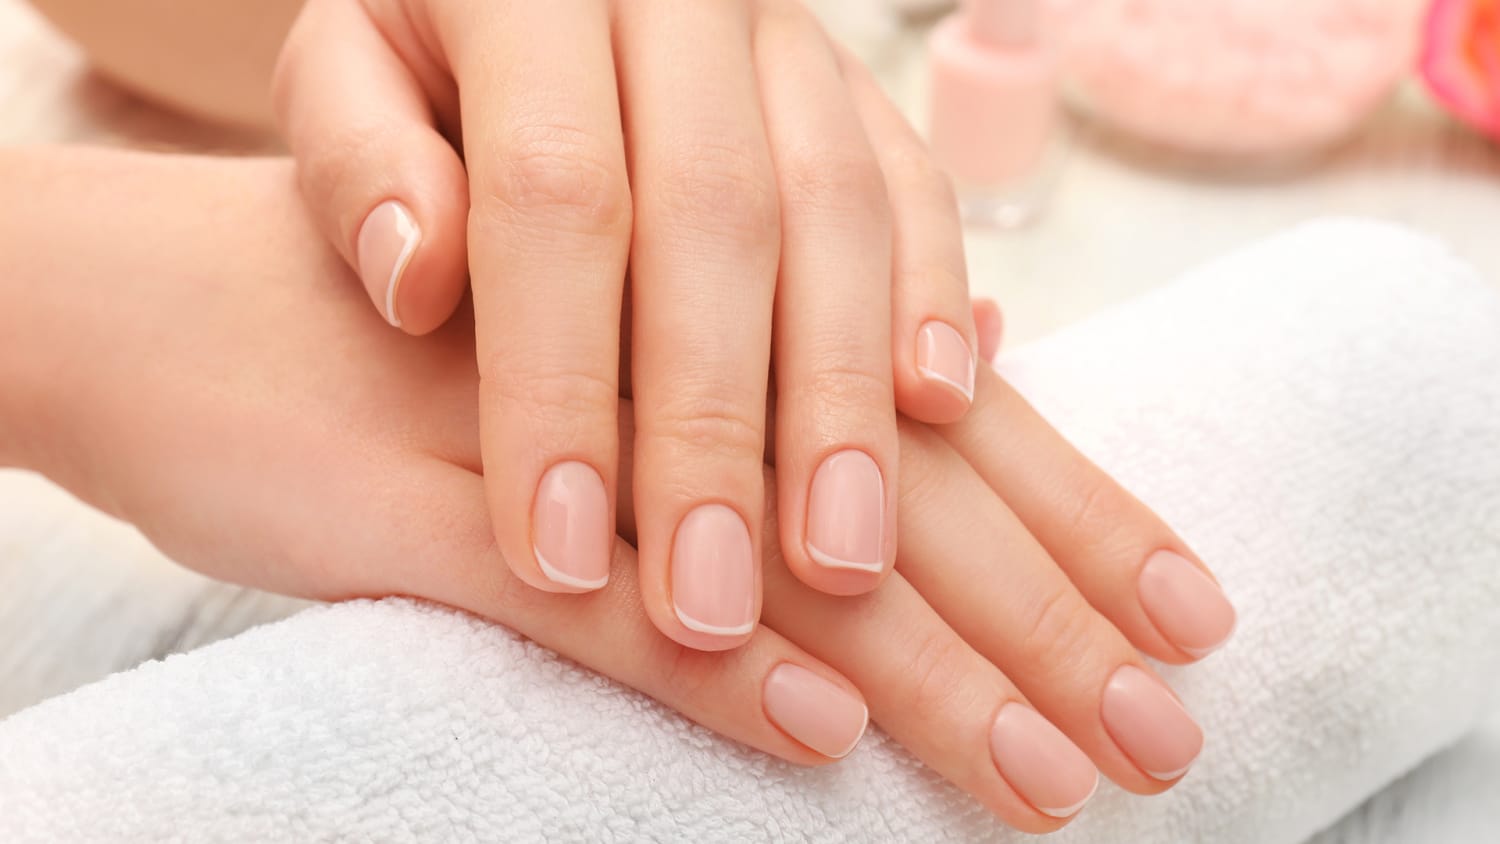 person dictionary crime Are Gel Manicures Safe? UV Exposure, Skin Cancer Risk To Consider